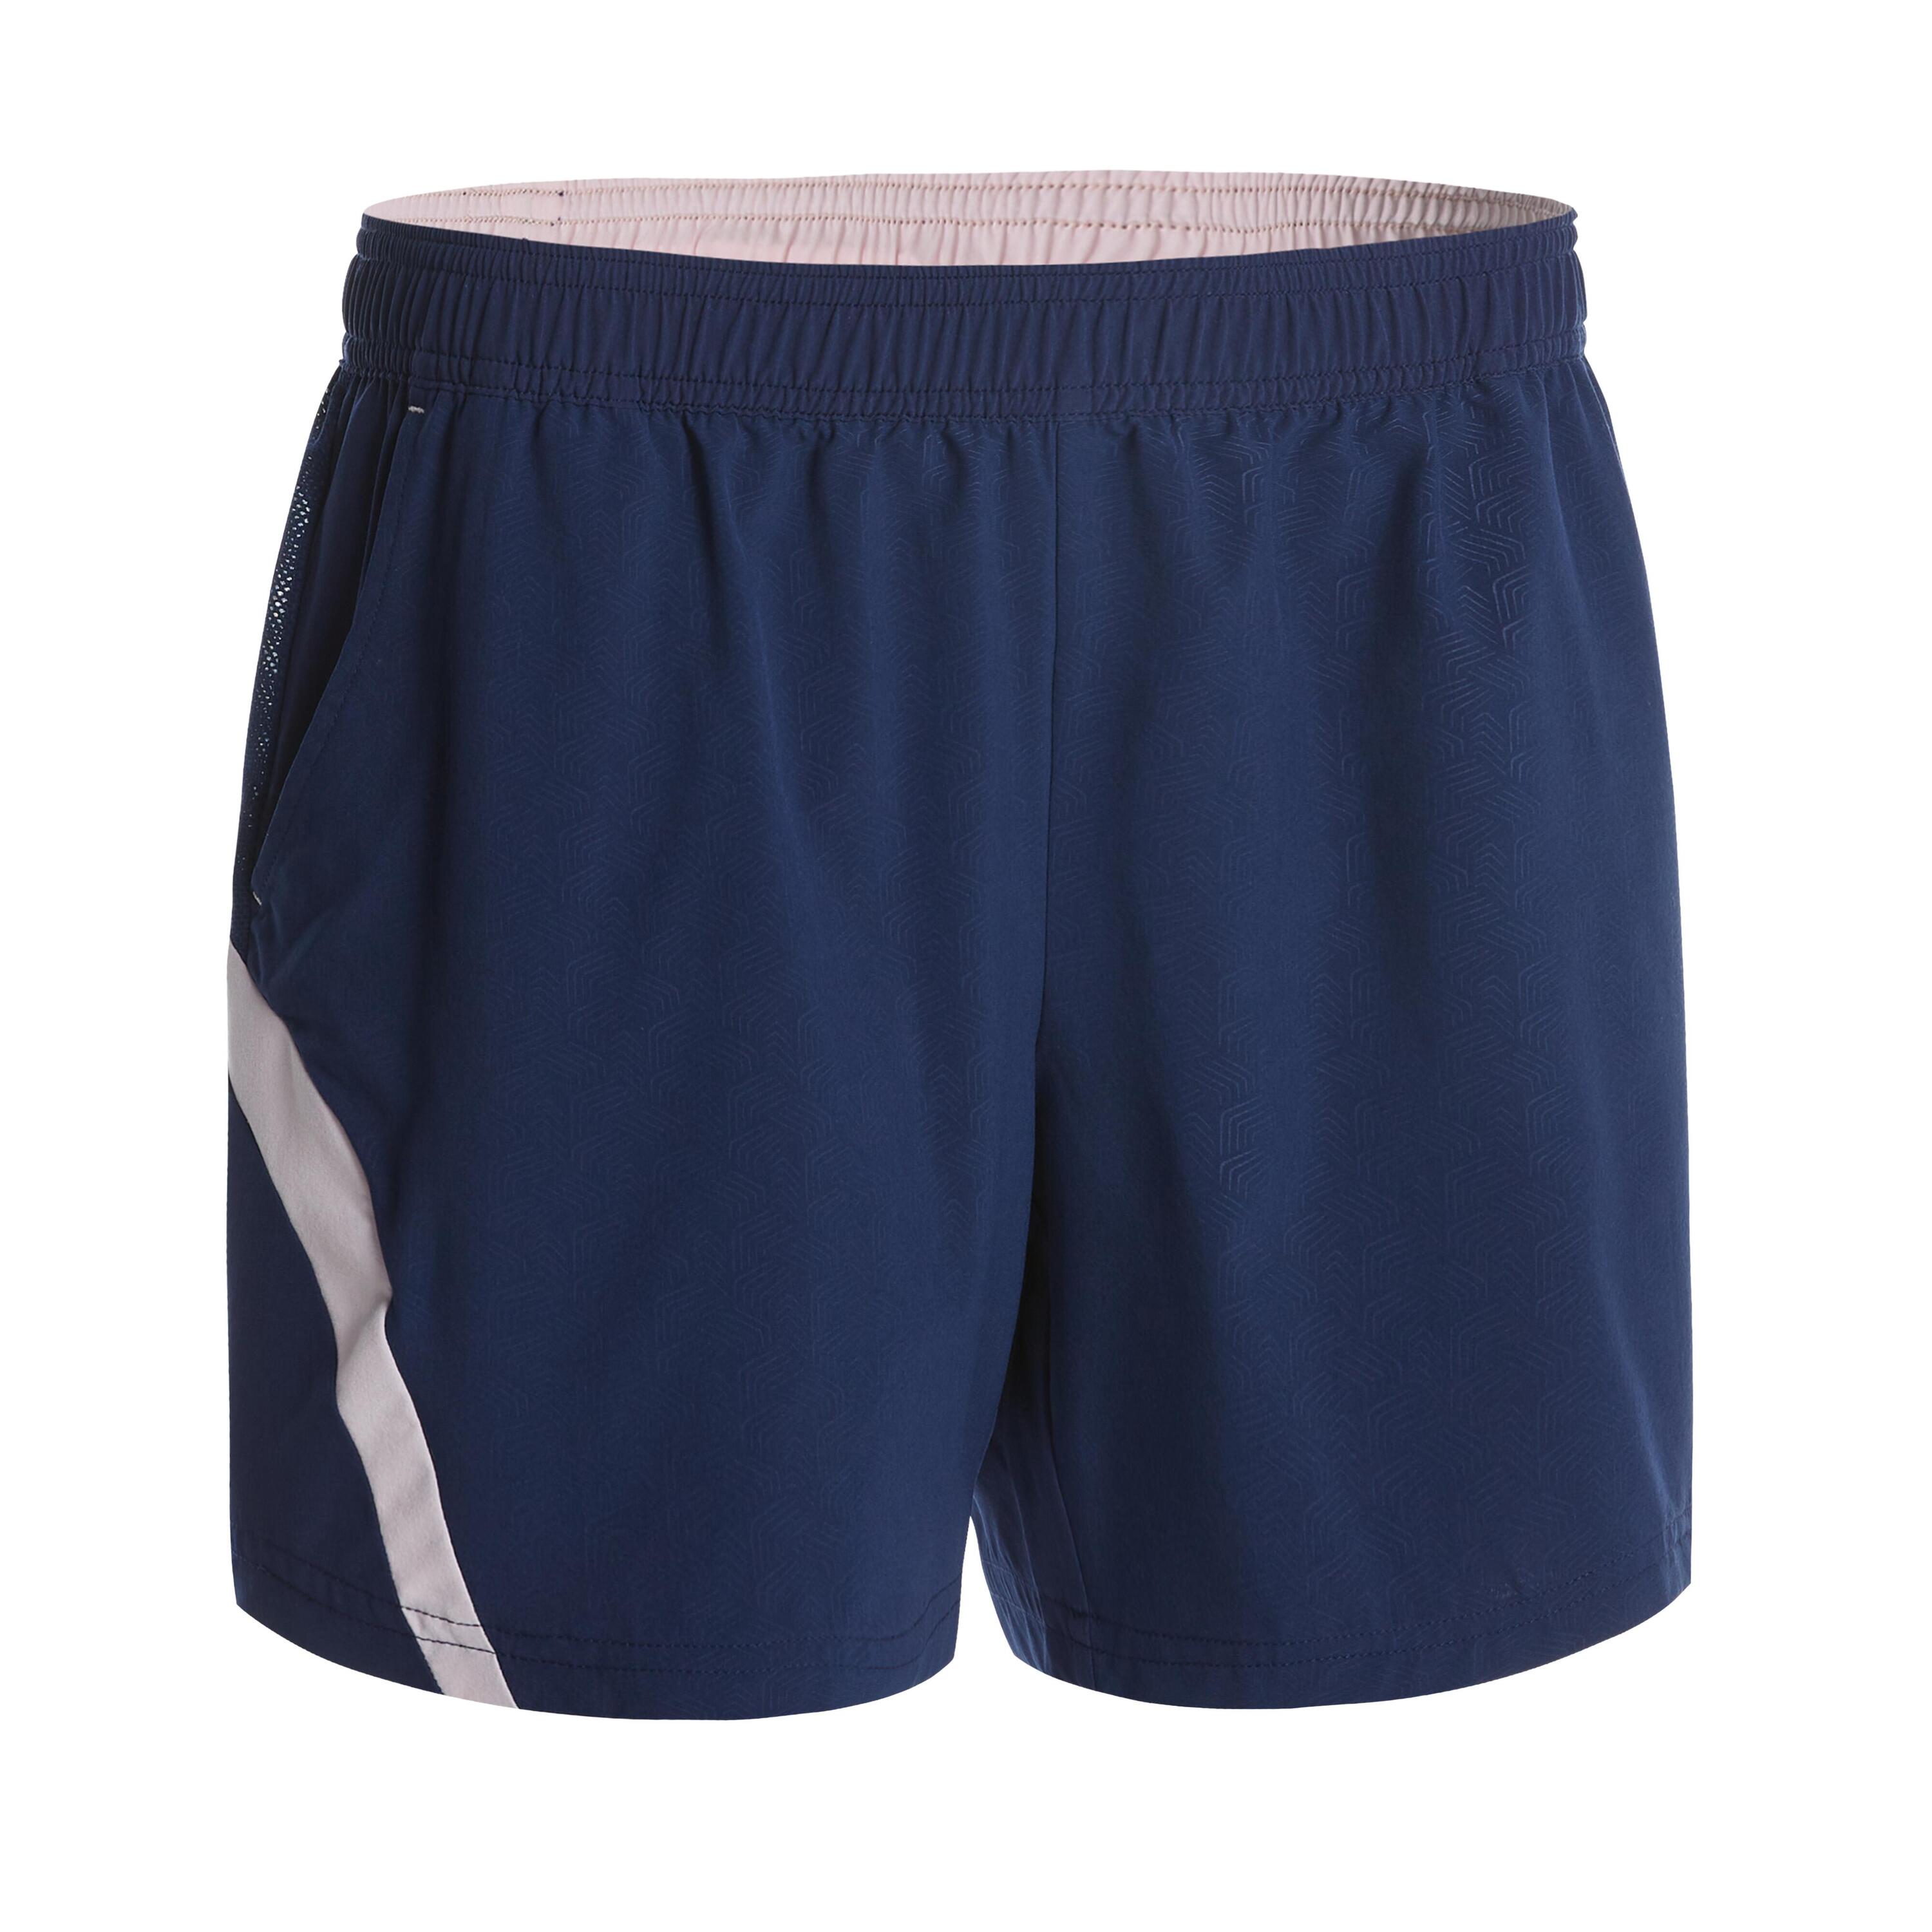 PERFLY SHORTS 560 W NAVY PINK